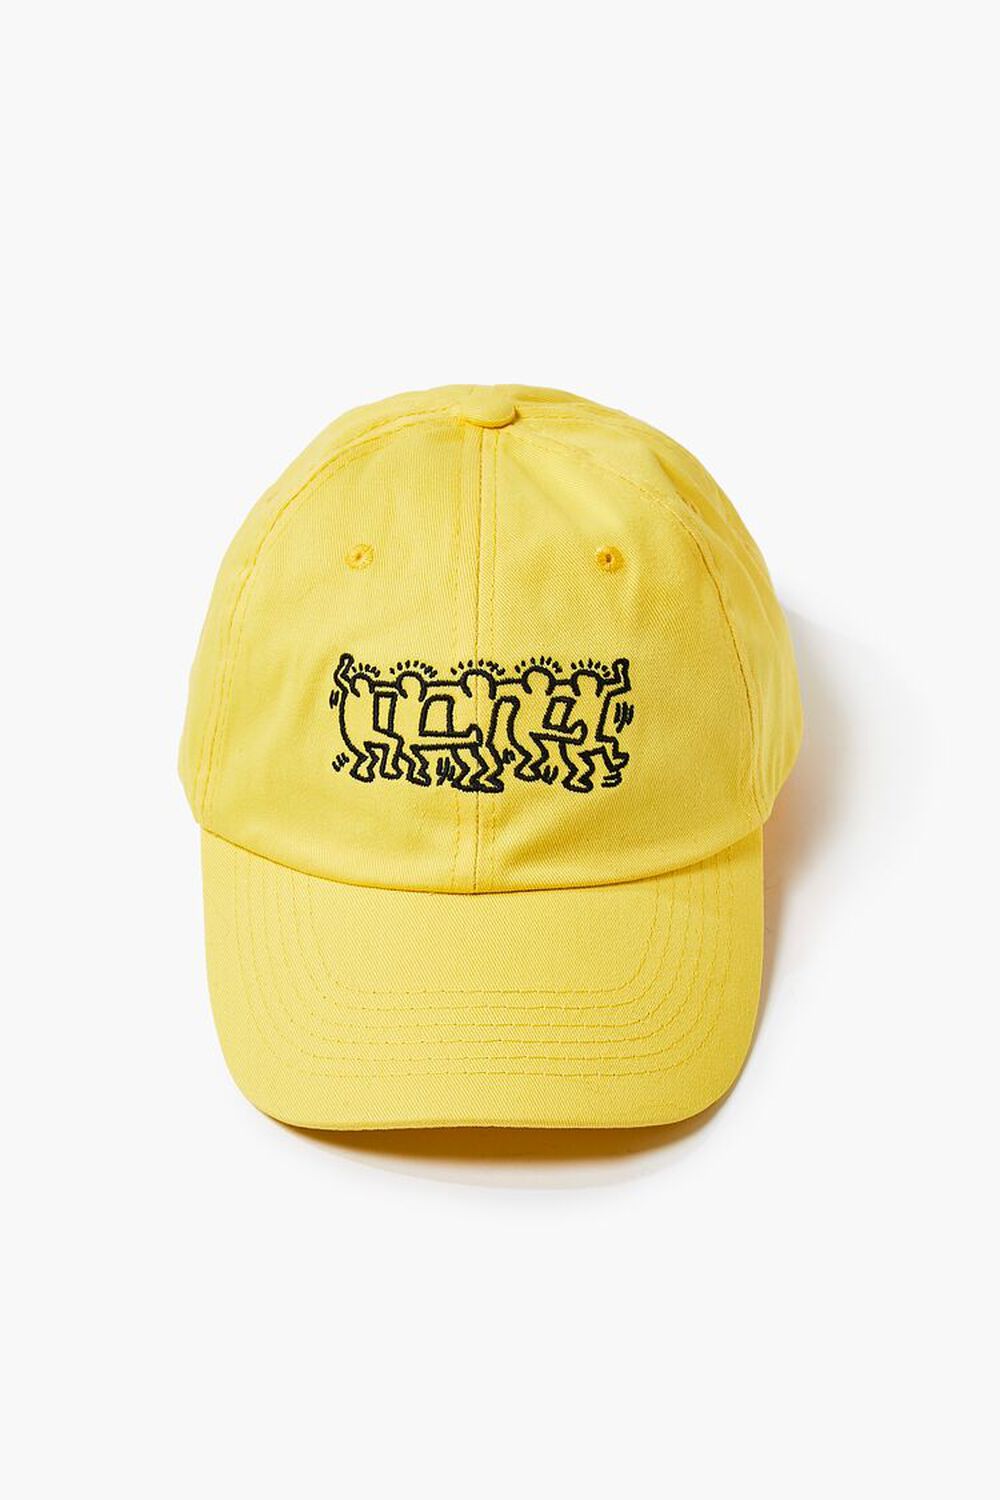 YELLOW/BLACK Embroidered Keith Haring Dad Cap, image 1